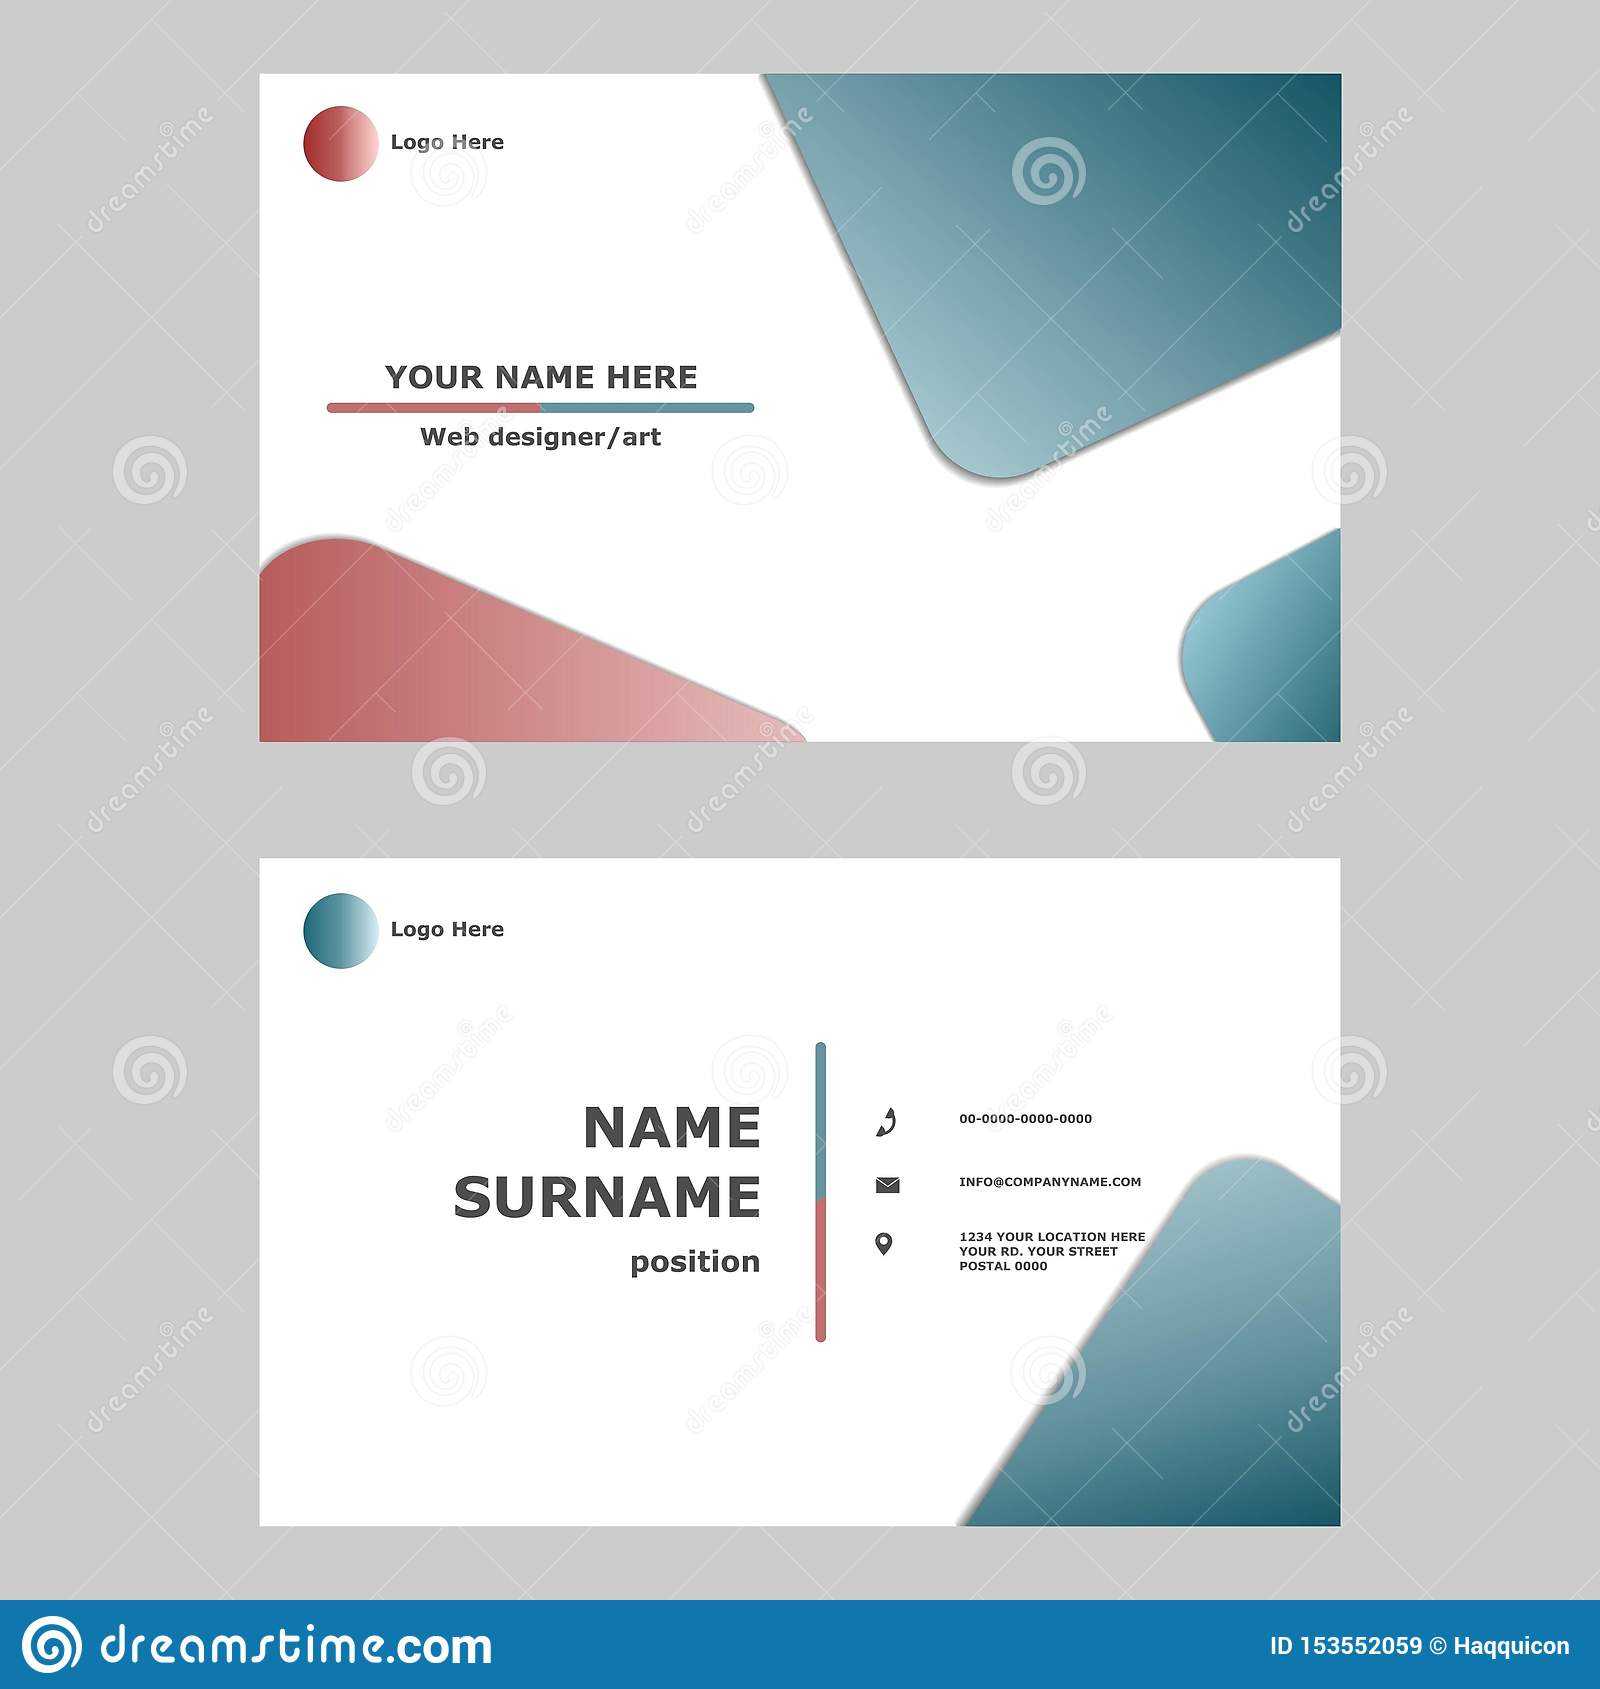 Business Card Template Design Concept.illustration Of Vector Intended For Professional Name Card Template